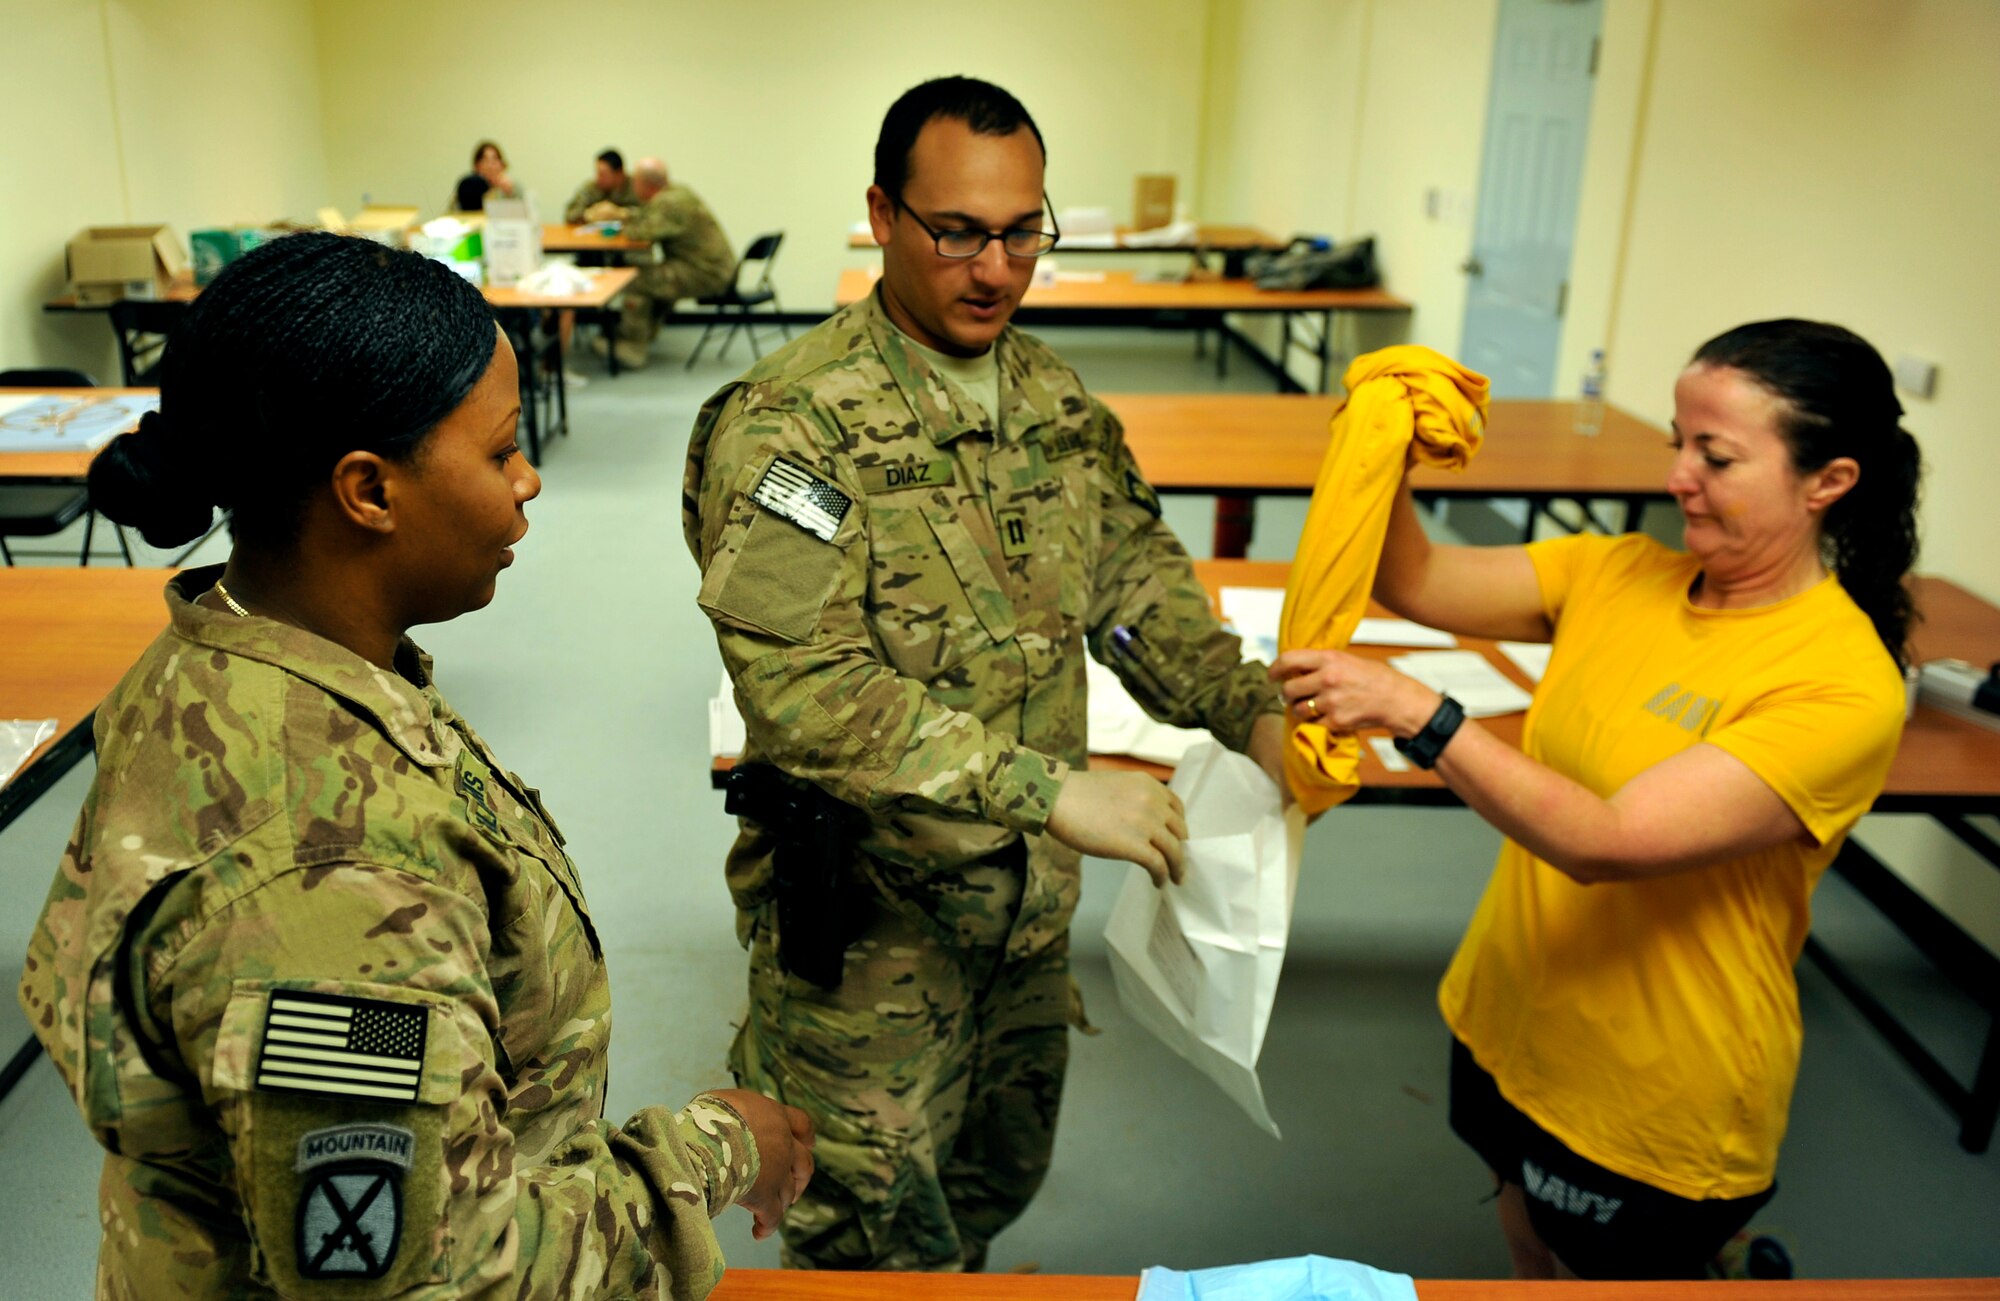 U.S. Army Maj. Alecia Wilson, Sexual Assault Forensic Examinations instructor, observes as Army Capt. Juan Diaz conducts an exam on a simulated patient on Bagram Airfield, Afghanistan, May 25, 2013. Diaz is a surgeon and he will be returning to his base in Afghanistan to be one of two SAFE-qualified providers. (U.S. Air Force photo/Staff Sgt. Stephenie Wade)